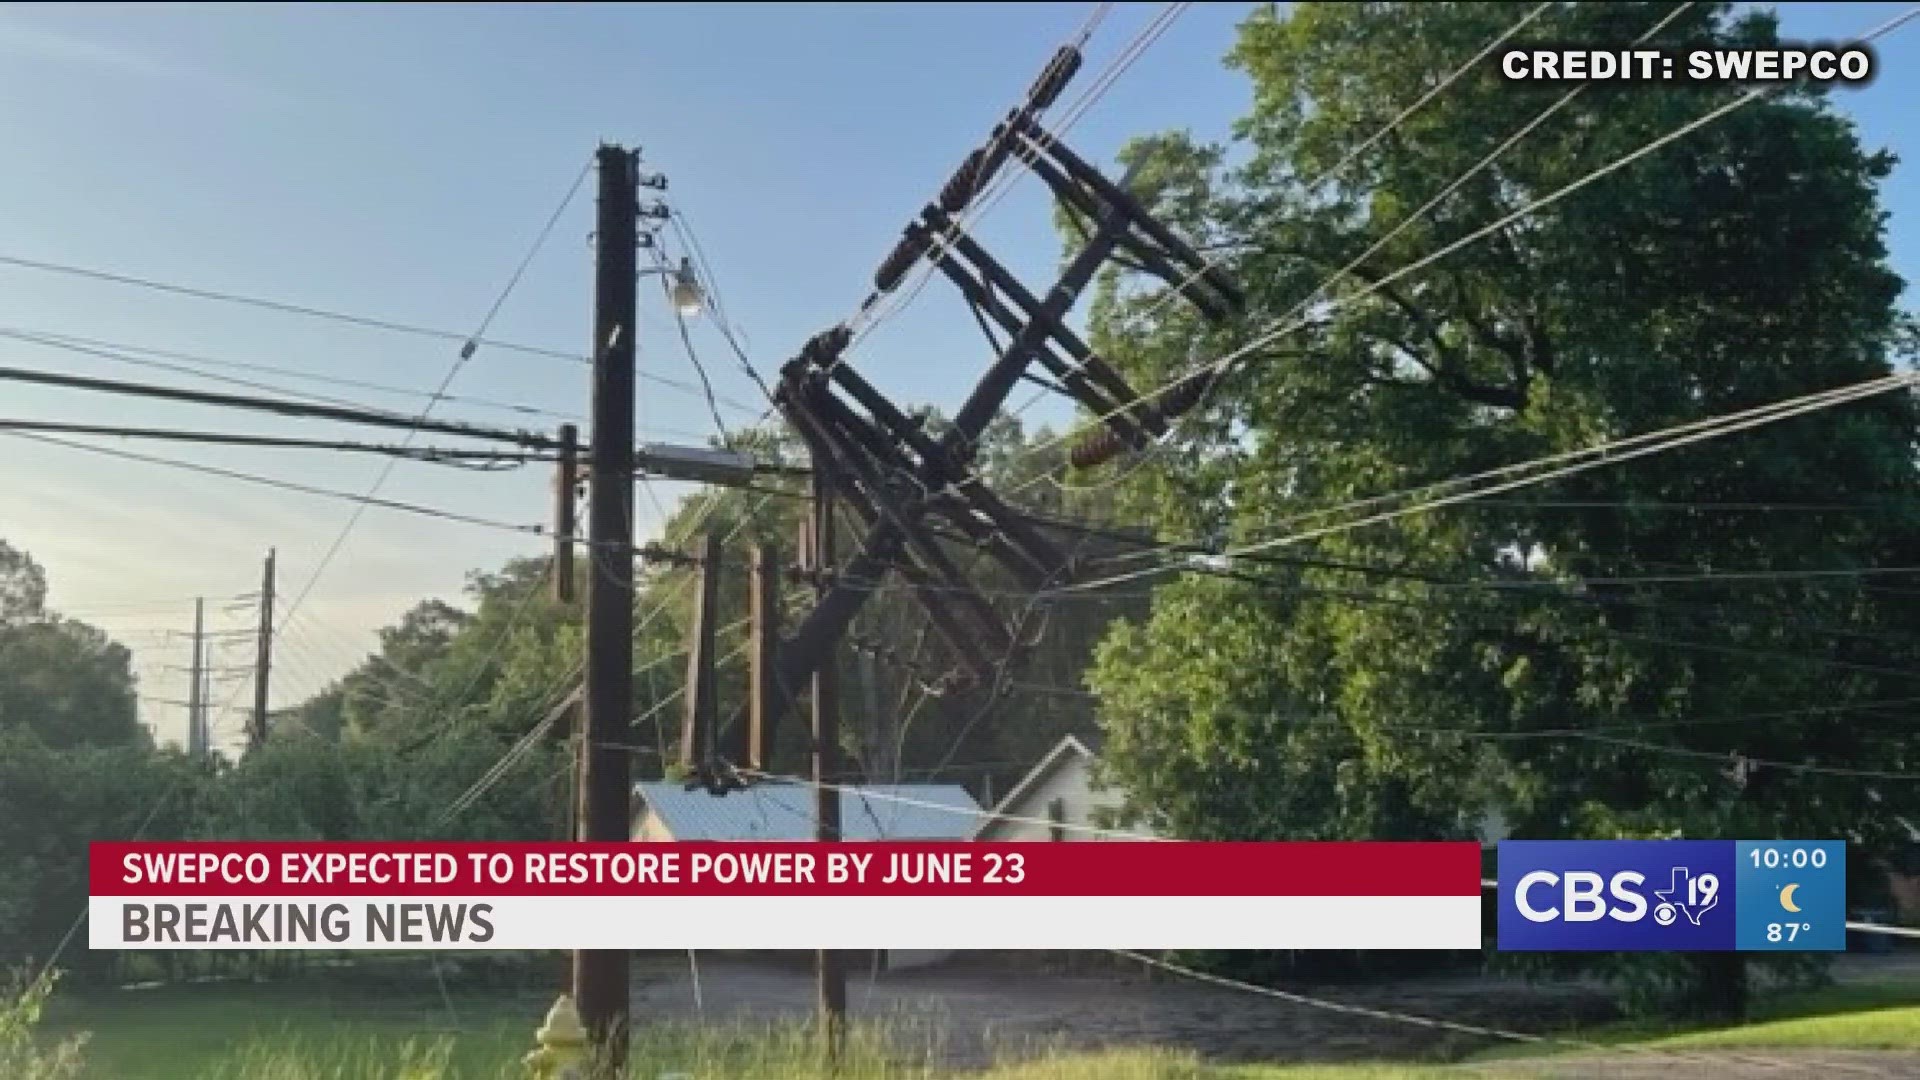 East Texas SWEPCO customers could be without power for up to 1 week following severe storms, company says